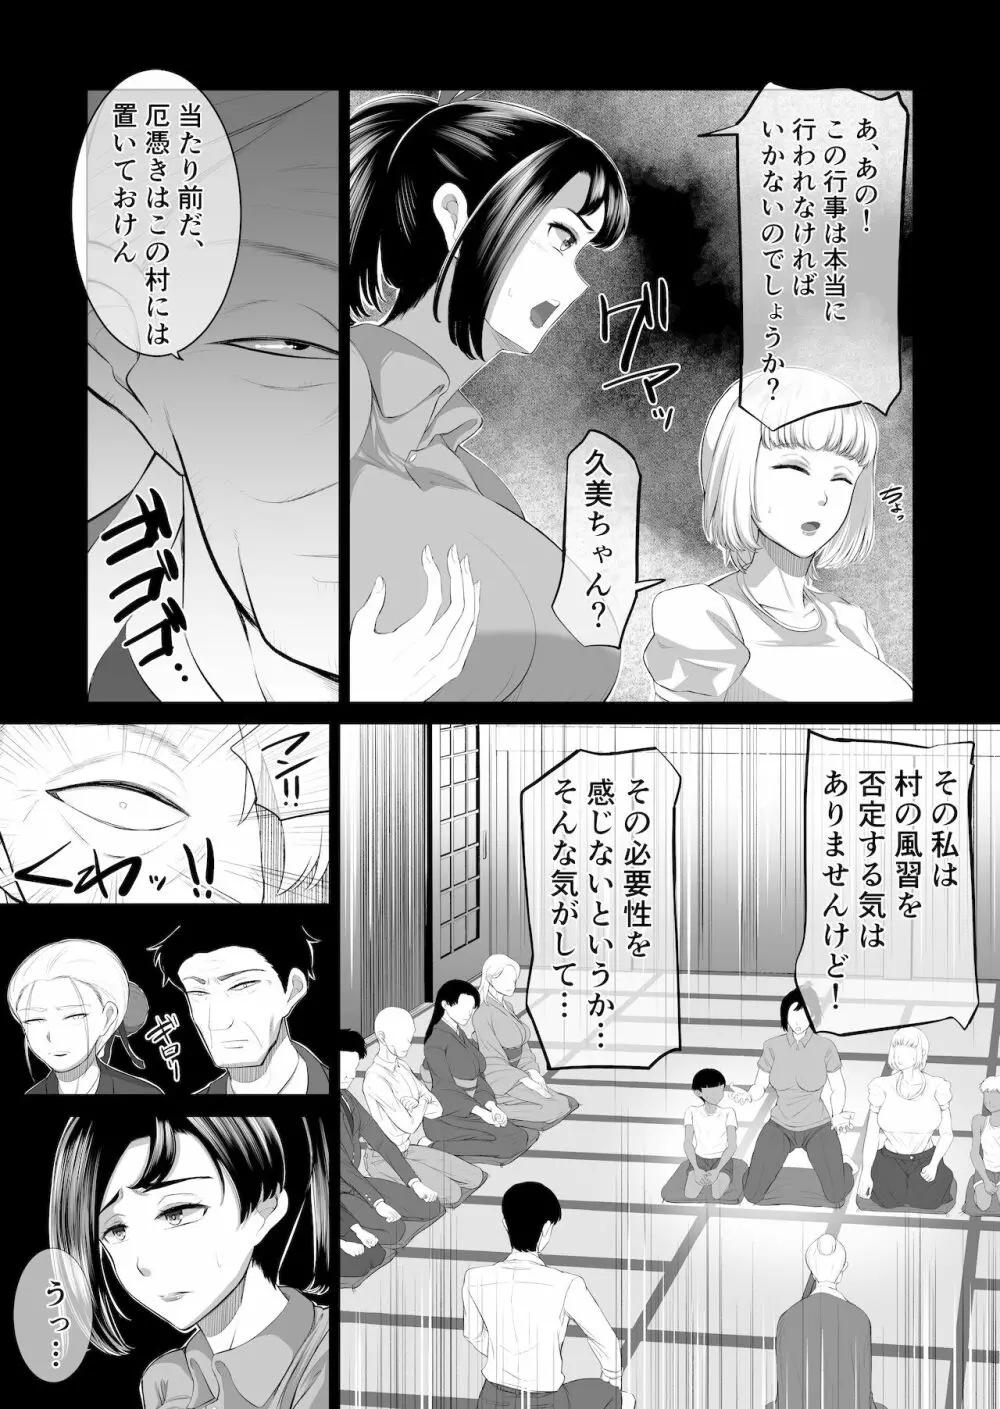 The 神孕村～やっくをやっつけろの巻～ Page.11